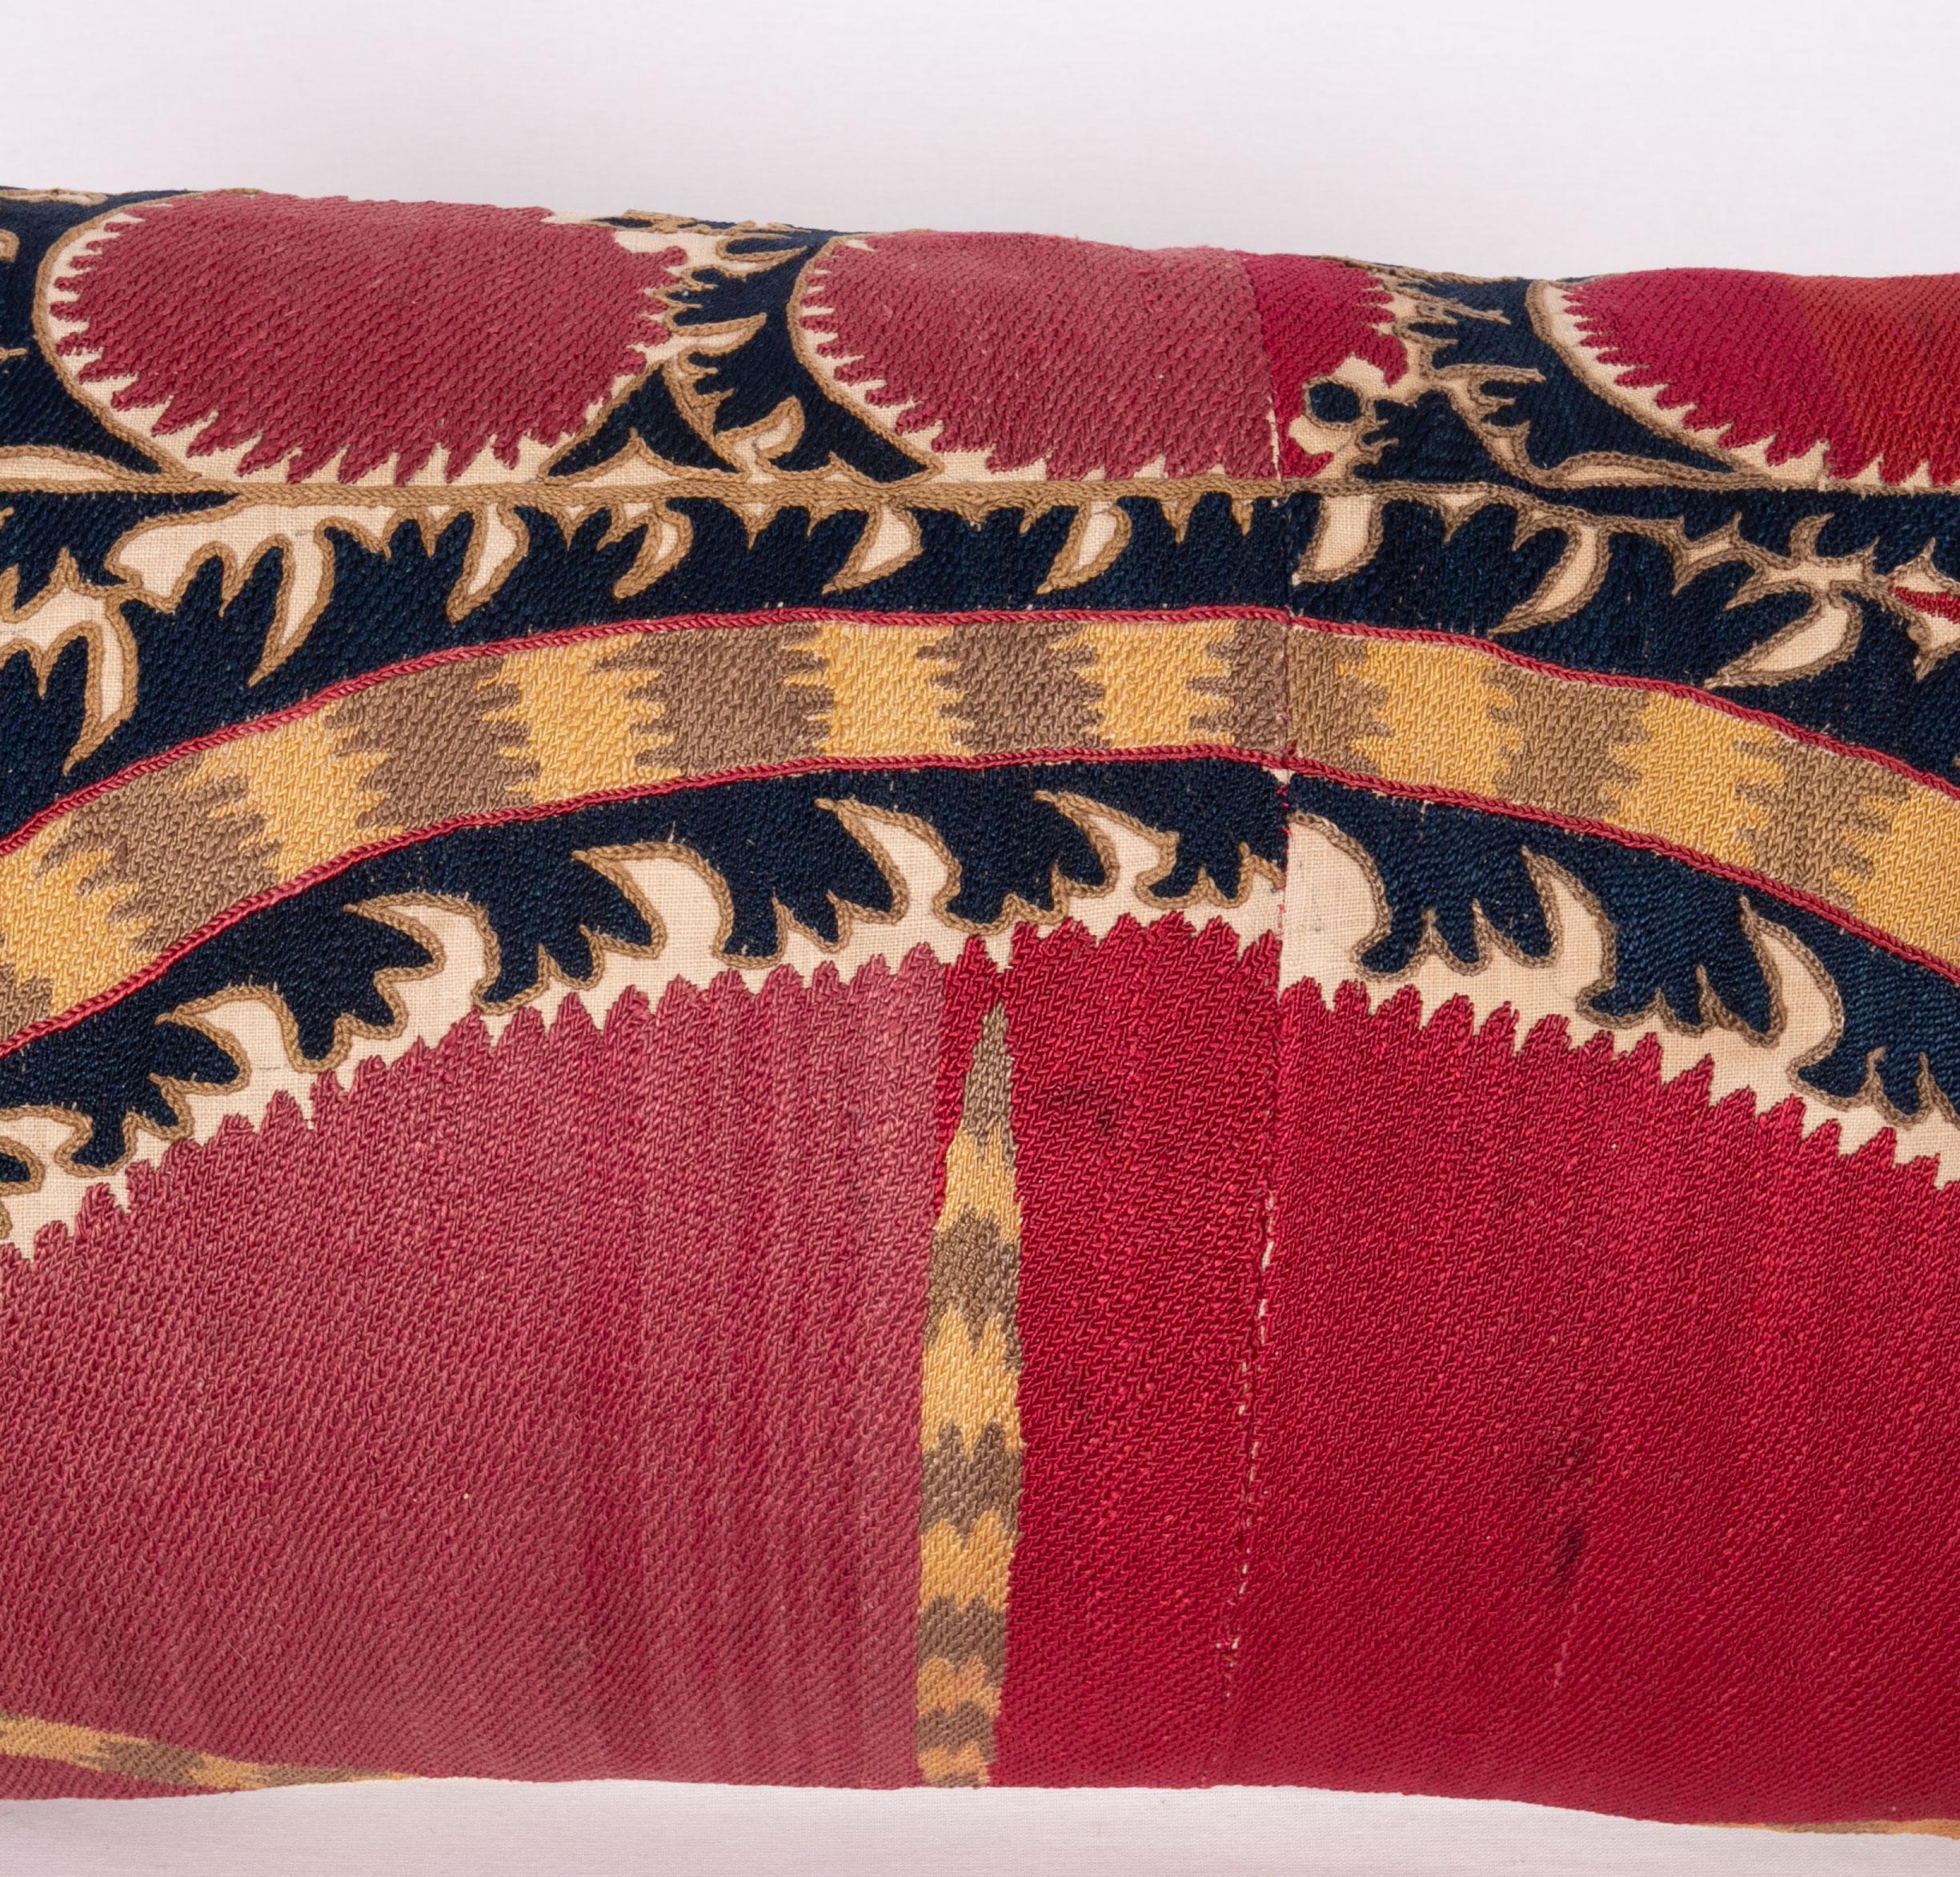 Embroidered Antique Tashkent Suzani Pillow Case Made from a 19th Century Suzani